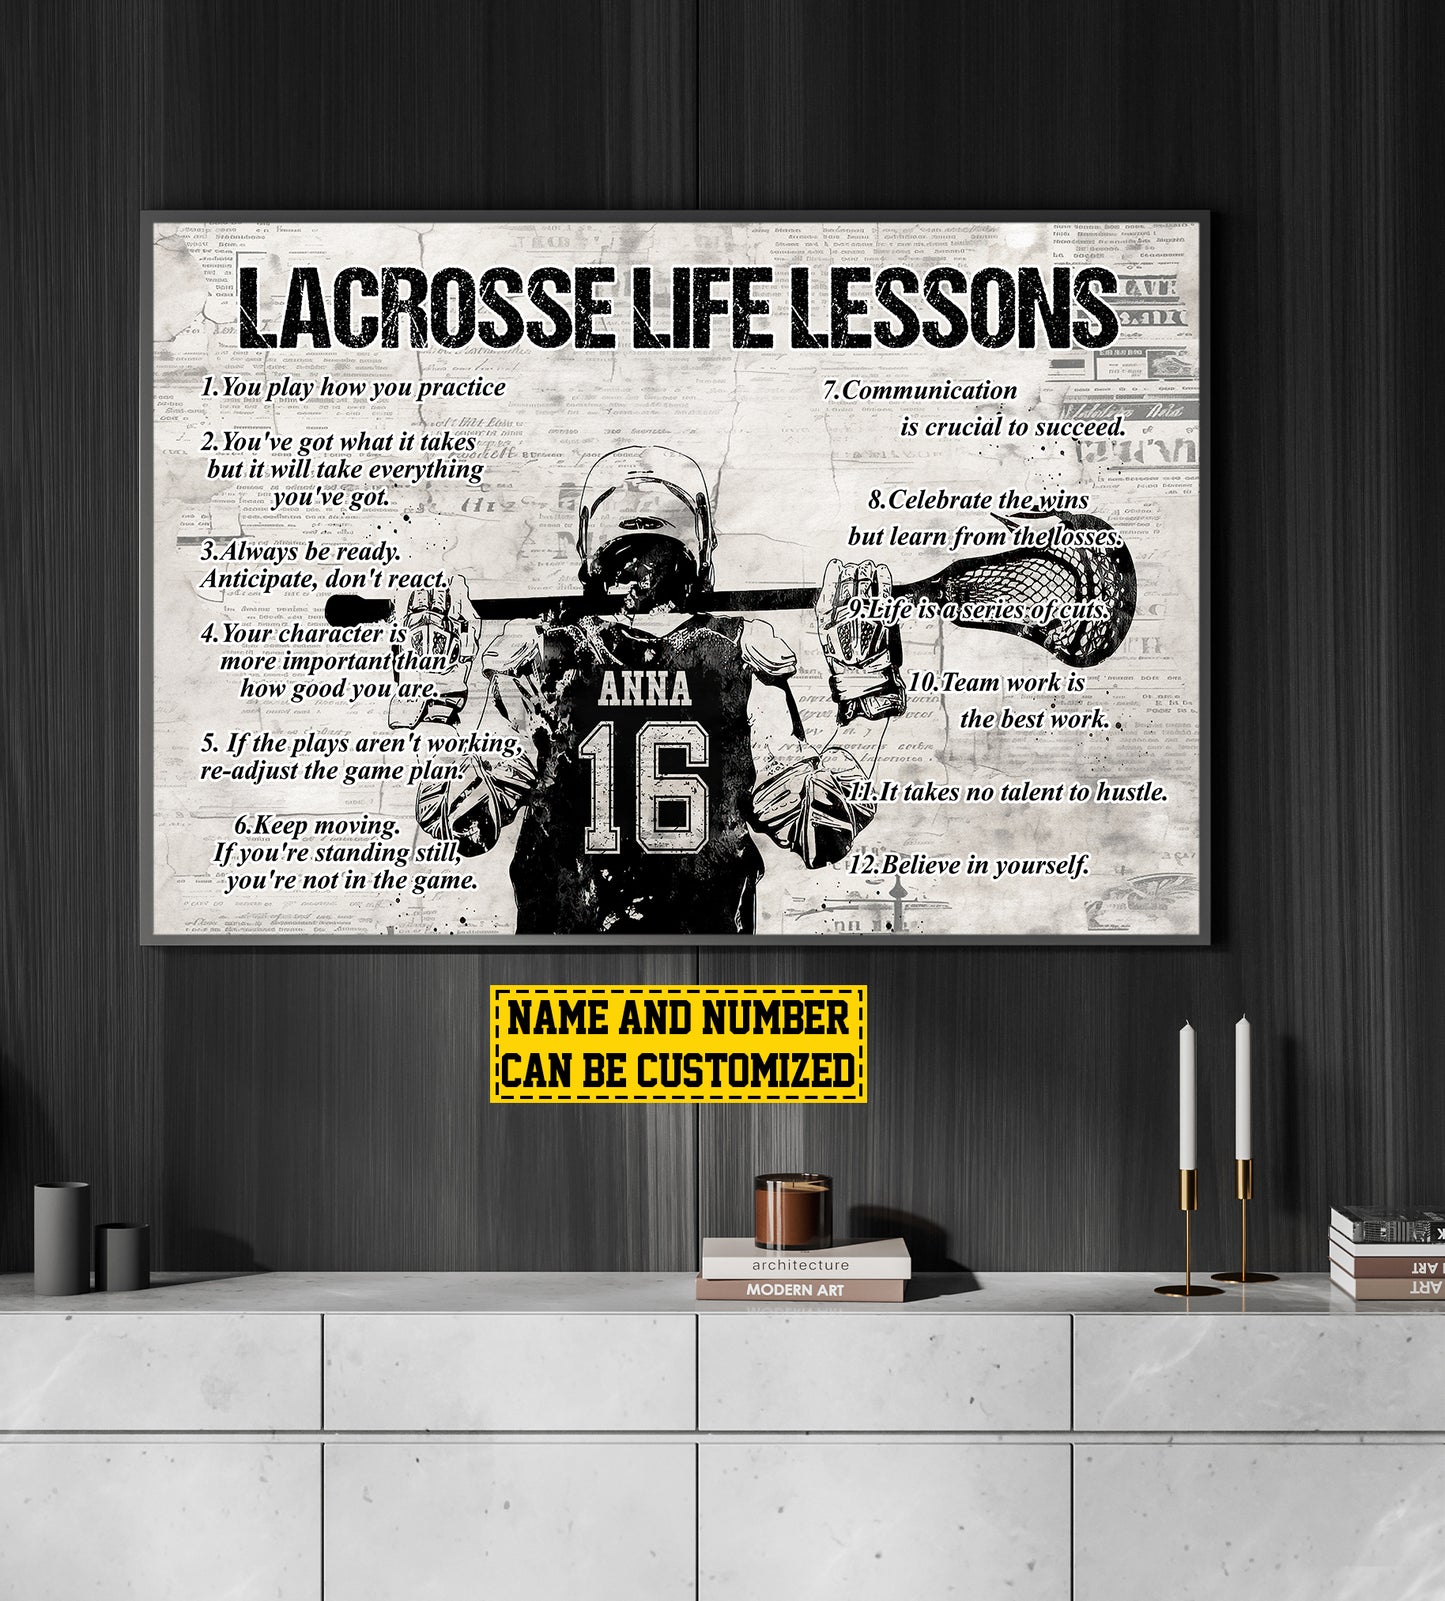 Lacrosse Boy Life Lessons, Personalized Motivational Lacrosse Canvas Painting, Inspirational Quotes Wall Art Decor, Poster Gift For Lacrosse Lovers